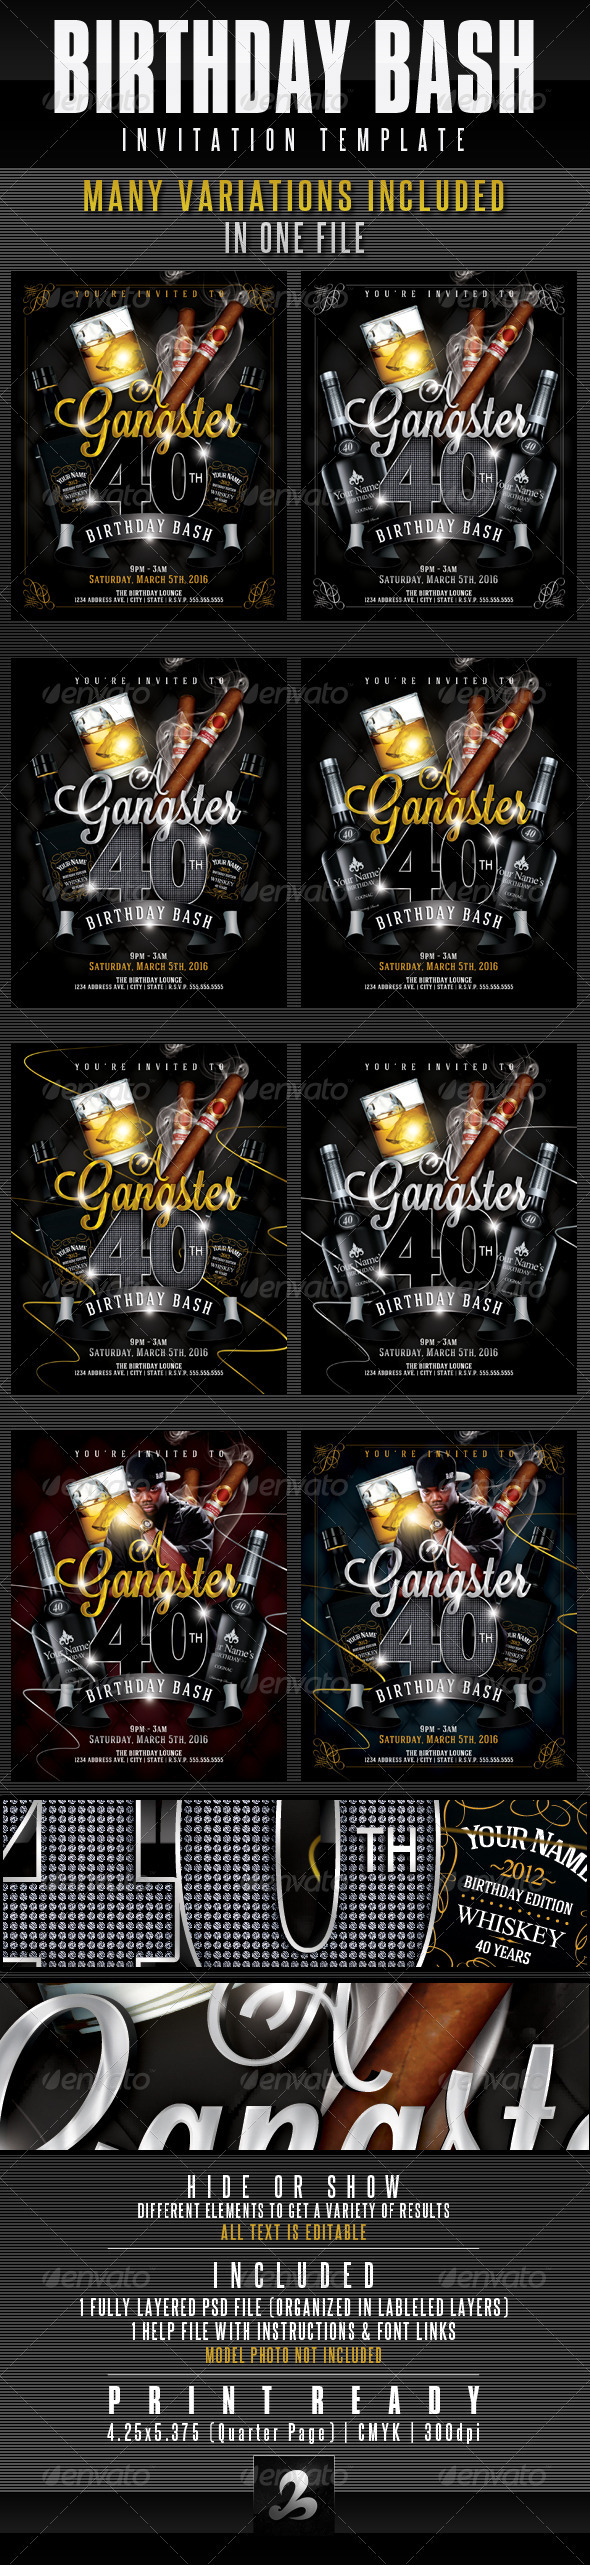 Download Gangster And Molls Party Invitations » Tinkytyler.org ...